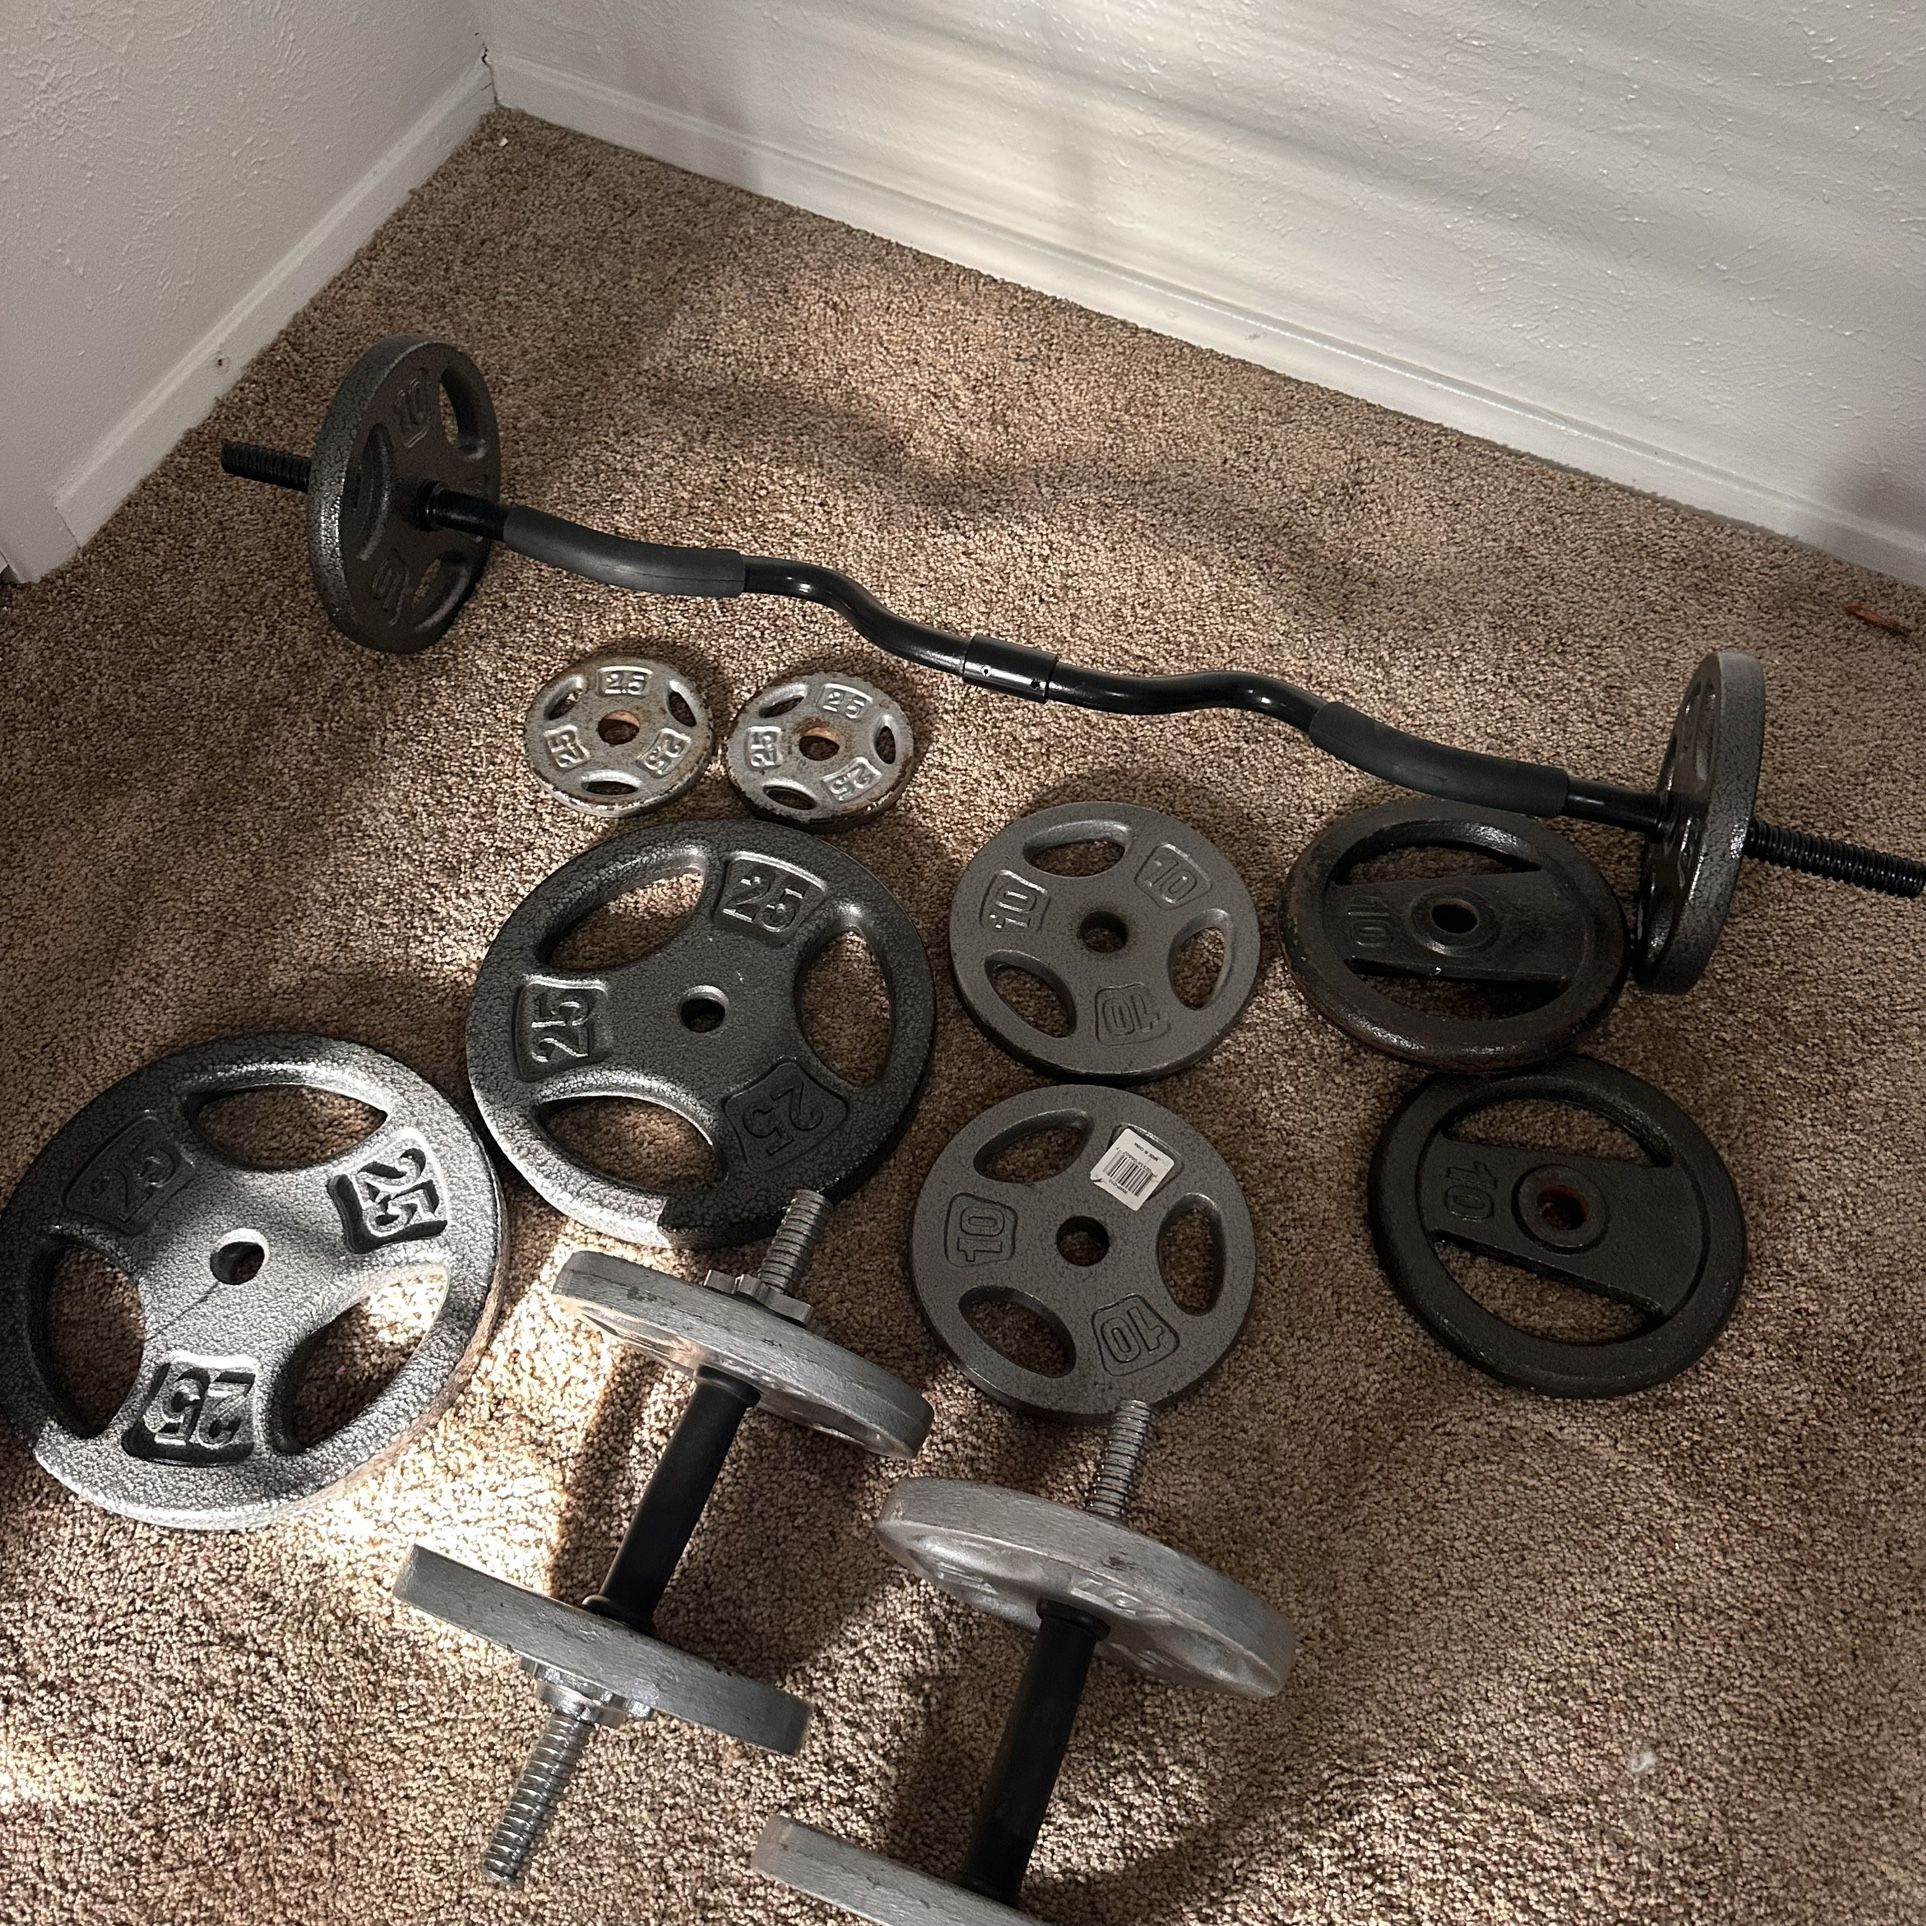 Exercise Equipment, Plates And Bar  ALL for $120